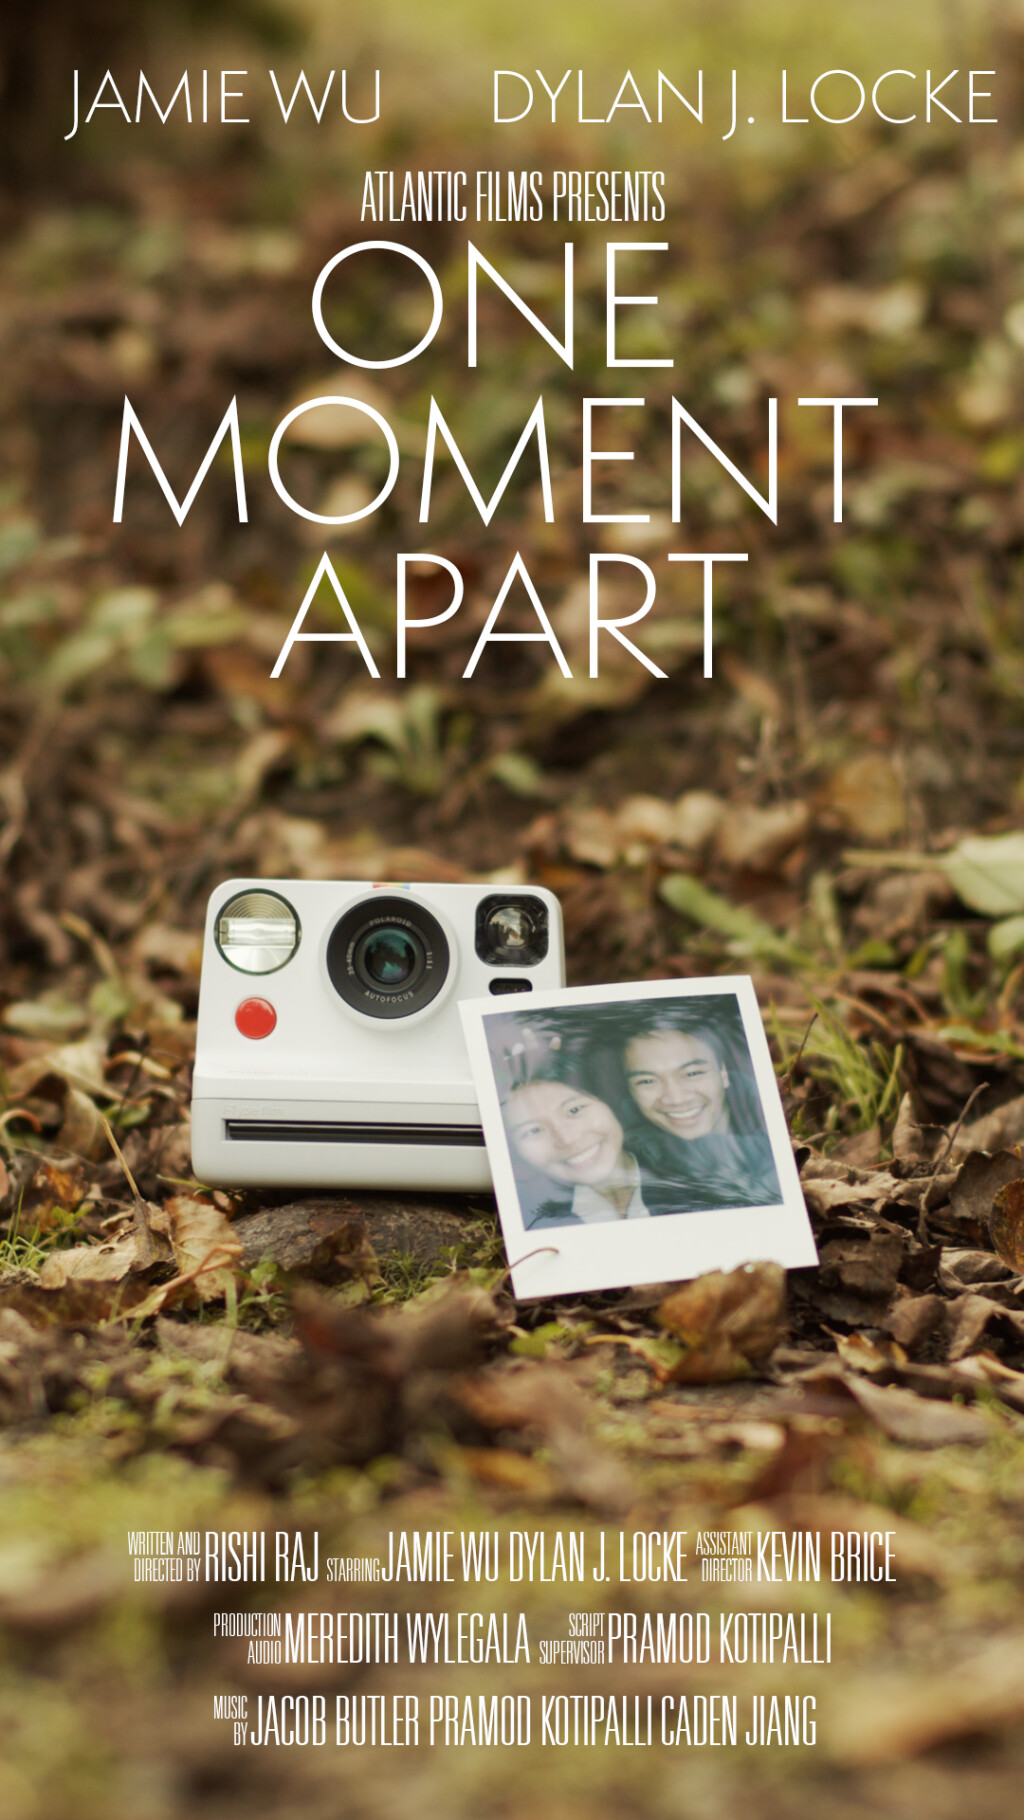 Filmposter for One Moment Apart